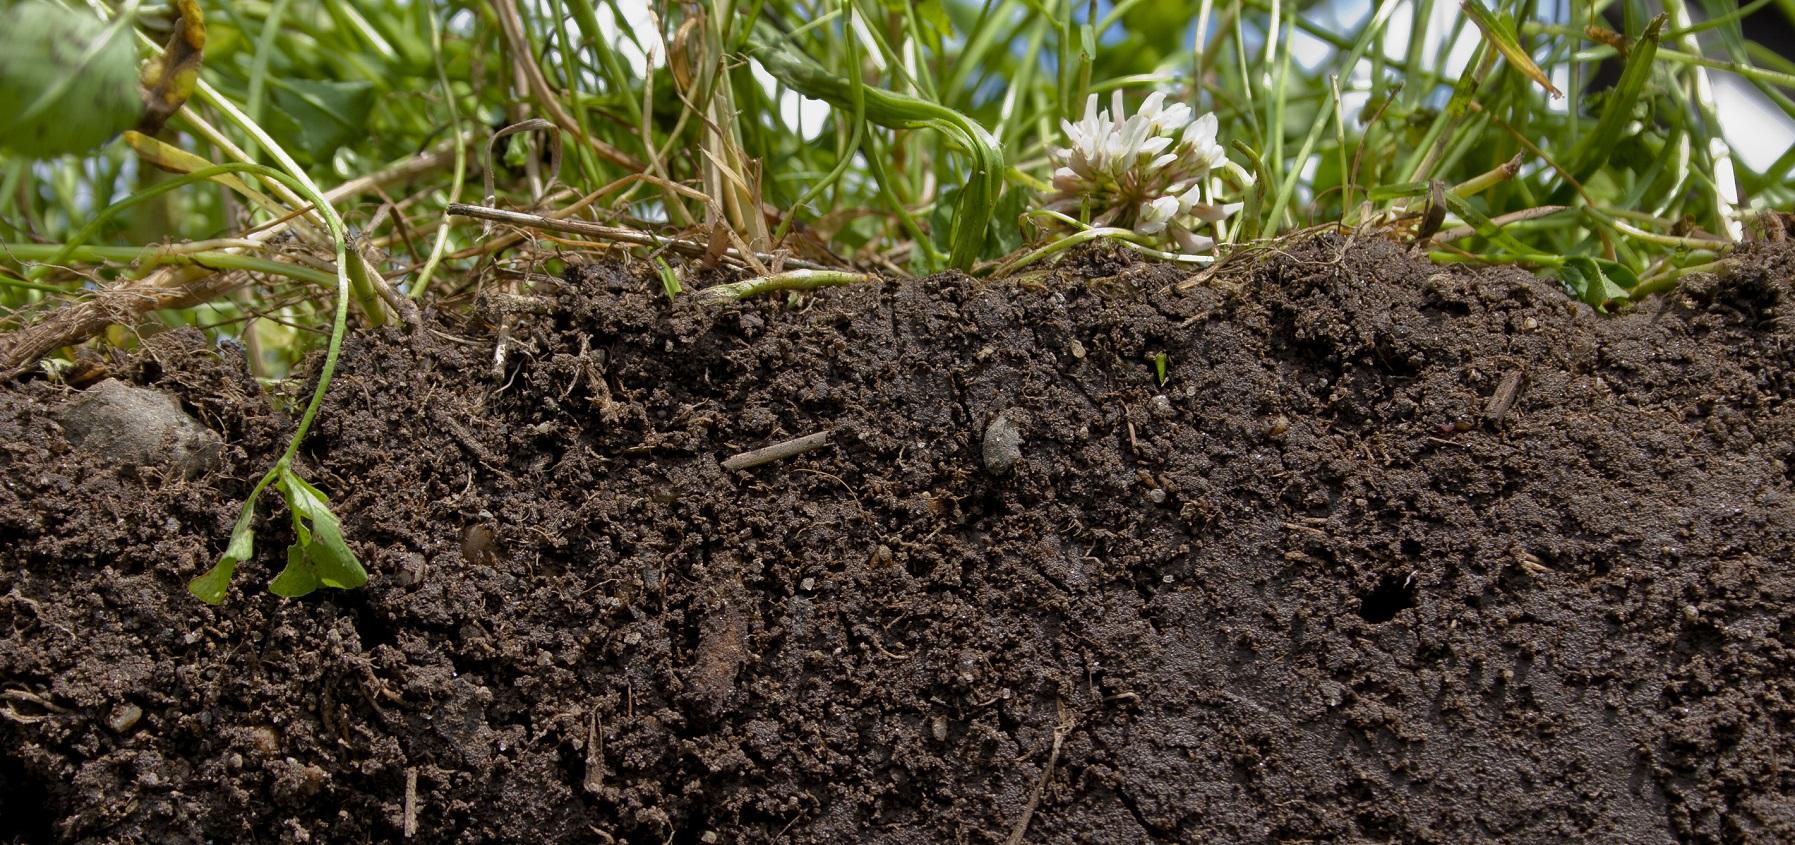 cross-section of healthy soil